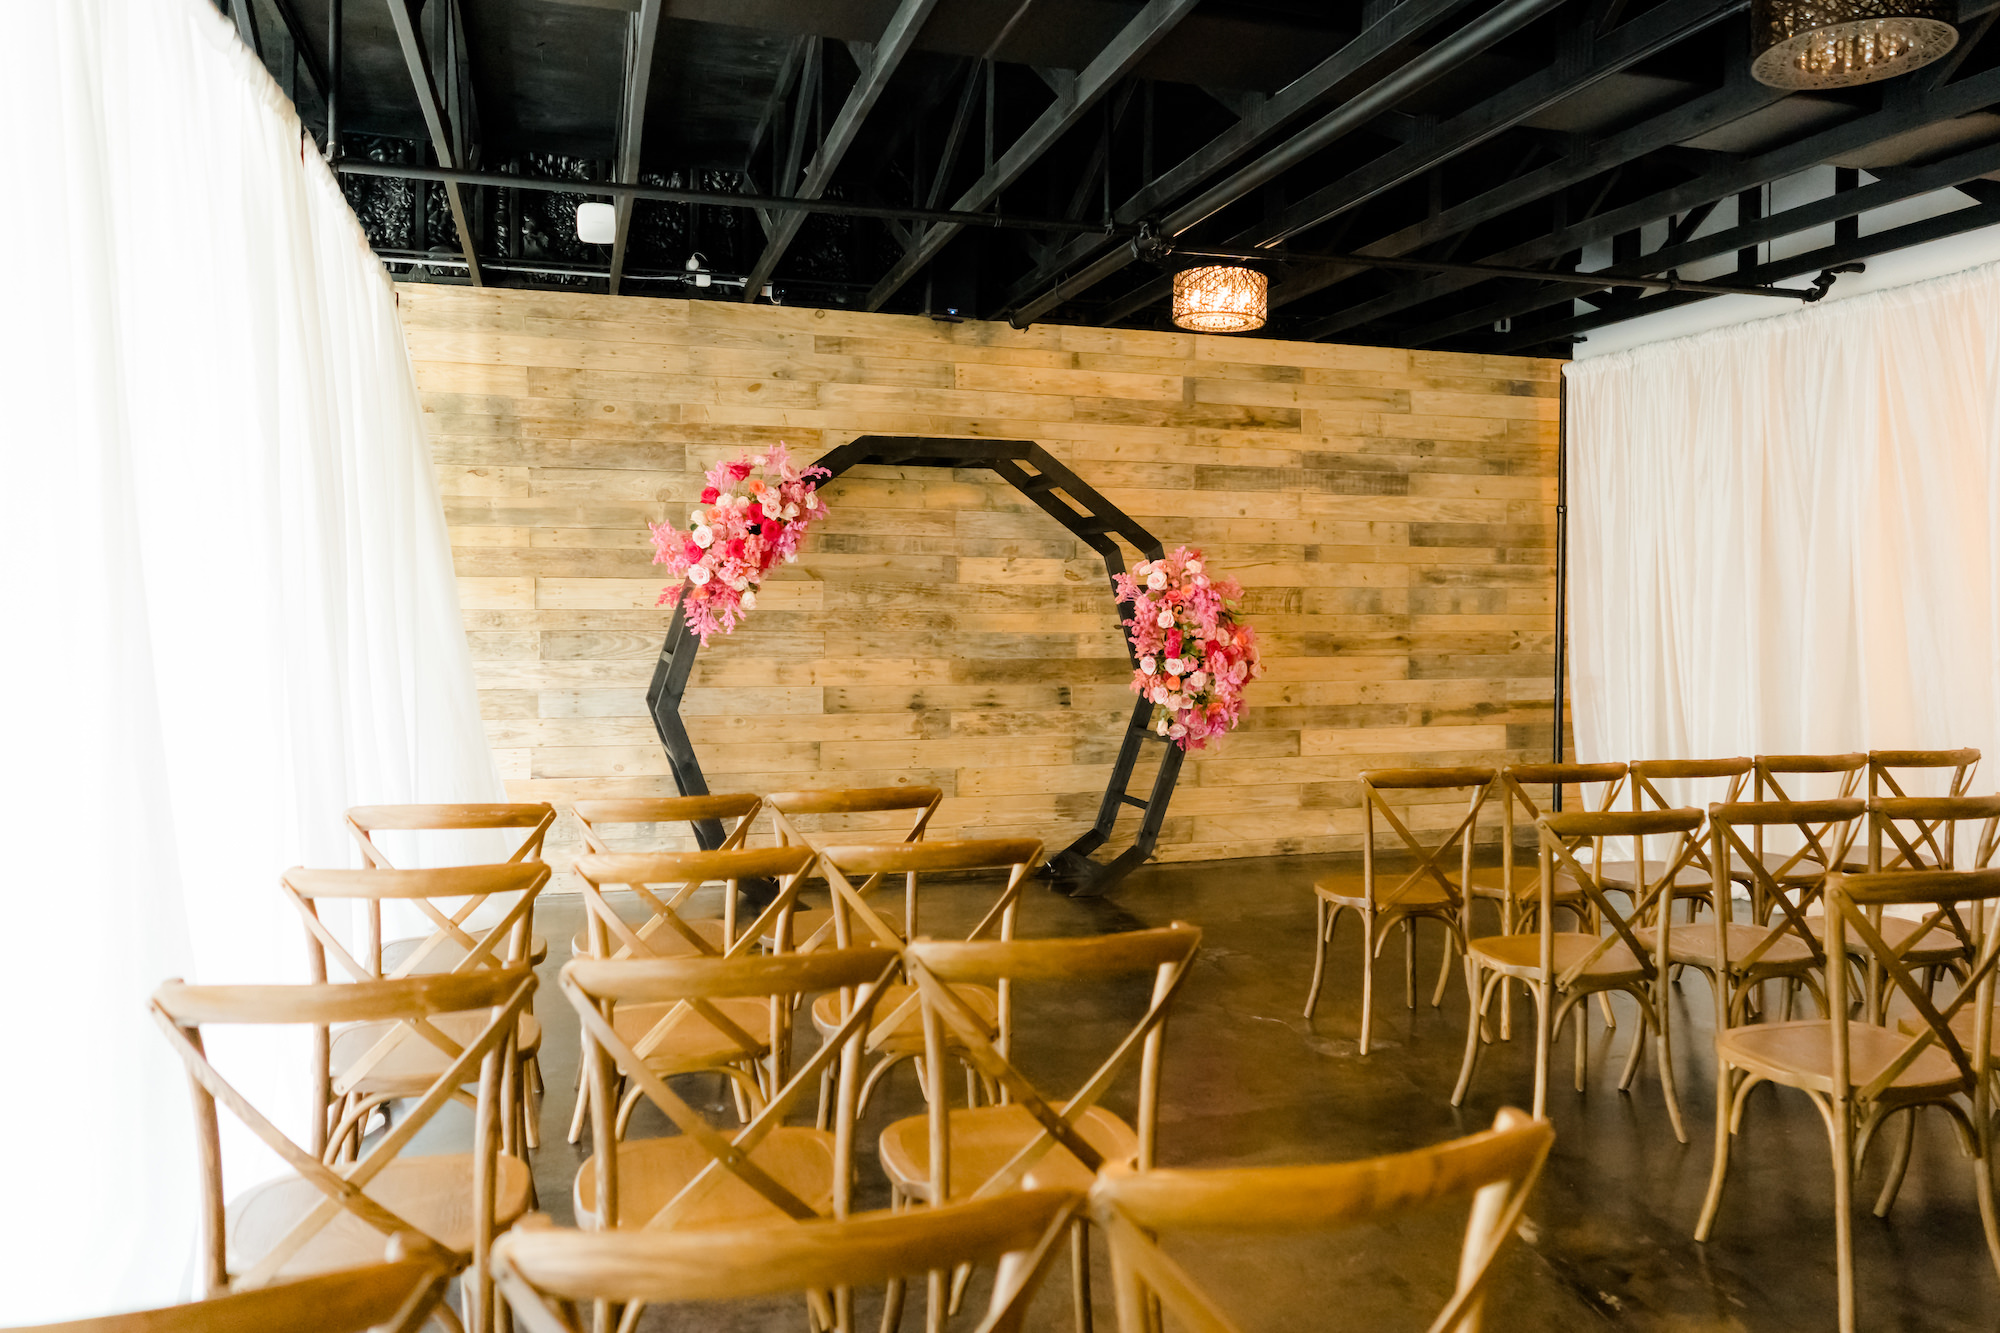 Rustic Boho Wedding Ceremony Decor, Wooden Cross Back Chairs, Black Geometric Arch with Lush Pink and Fuchsia Flower Arrangements | St. Pete Beach Wedding Venue The West Events